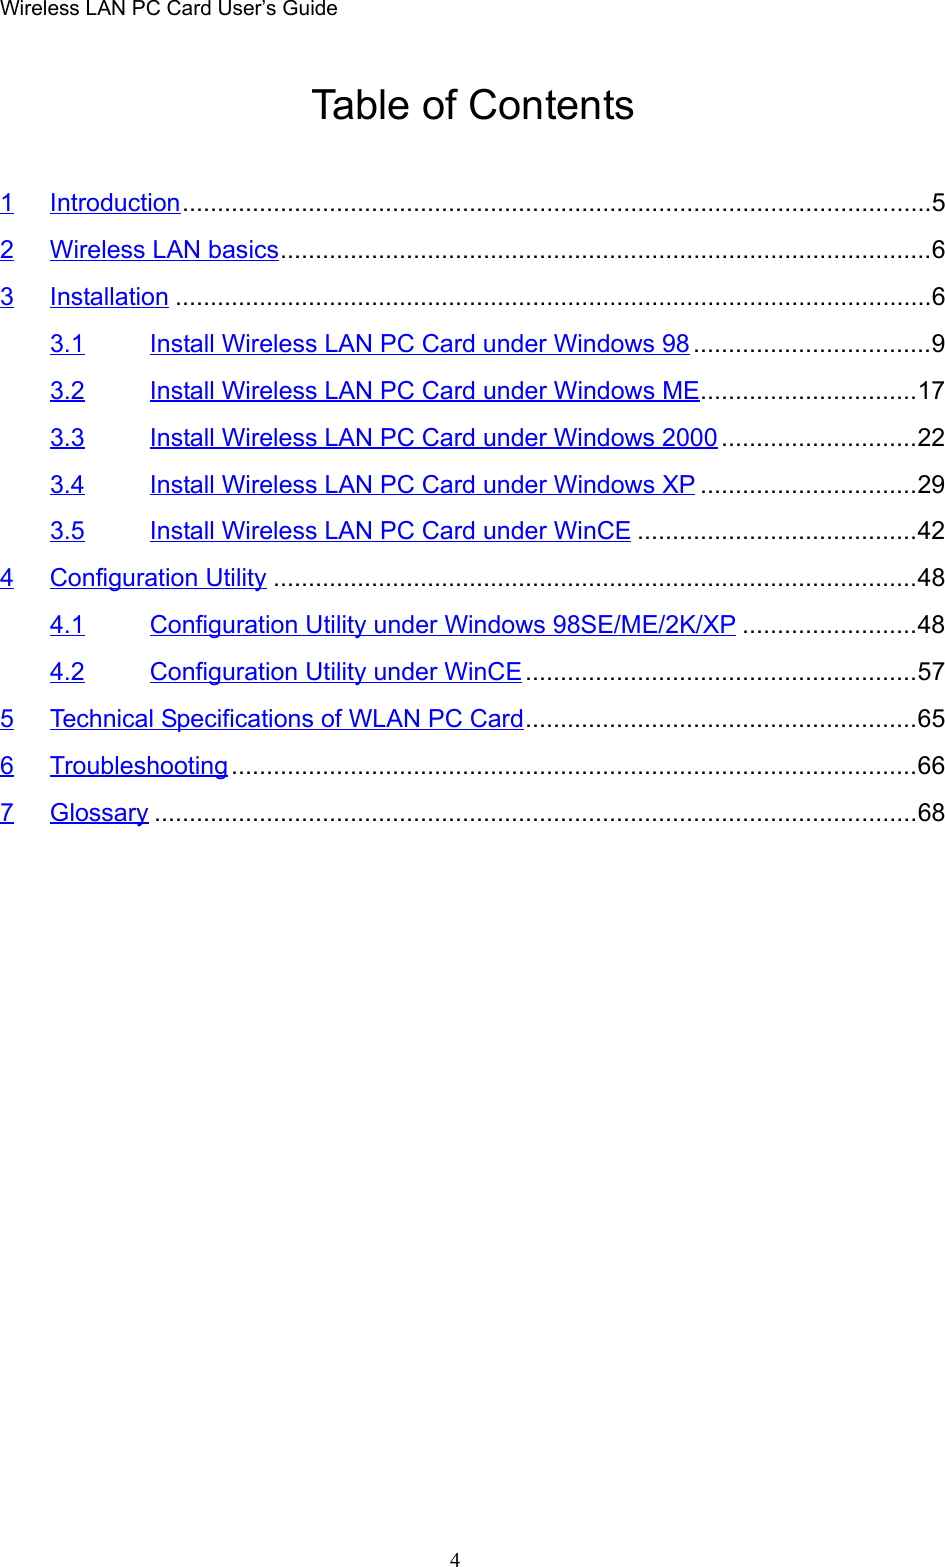 Wireless LAN PC Card User’s Guide4Table of Contents1 Introduction...........................................................................................................52 Wireless LAN basics.............................................................................................63 Installation ............................................................................................................63.1 Install Wireless LAN PC Card under Windows 98..................................93.2 Install Wireless LAN PC Card under Windows ME...............................173.3 Install Wireless LAN PC Card under Windows 2000 ............................223.4 Install Wireless LAN PC Card under Windows XP ...............................293.5 Install Wireless LAN PC Card under WinCE ........................................424 Configuration Utility ............................................................................................484.1 Configuration Utility under Windows 98SE/ME/2K/XP .........................484.2 Configuration Utility under WinCE........................................................575 Technical Specifications of WLAN PC Card........................................................656 Troubleshooting ..................................................................................................667 Glossary .............................................................................................................68